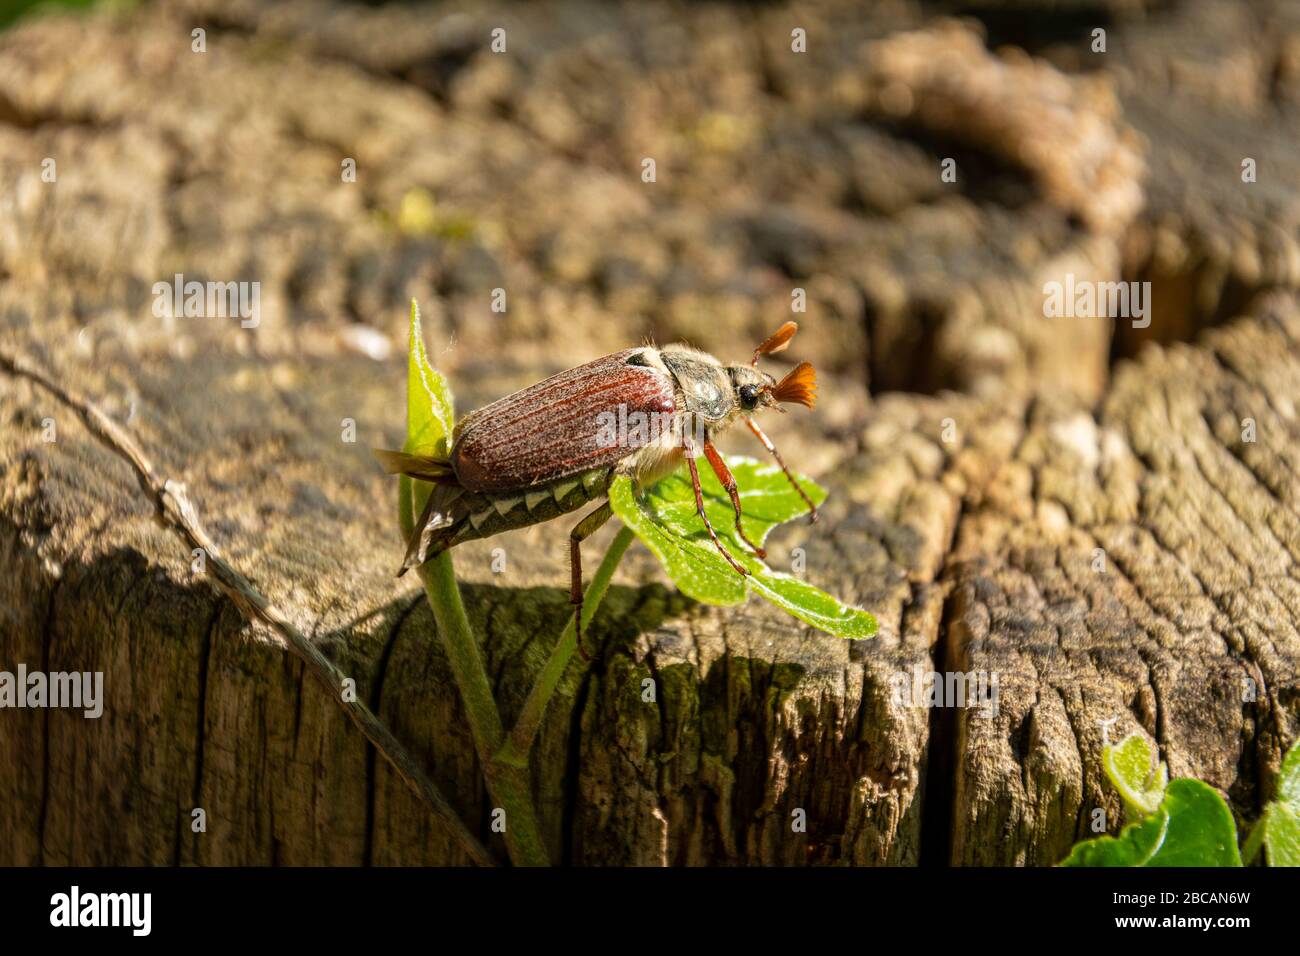 Cockchafer (Melolontha) Stock Photo